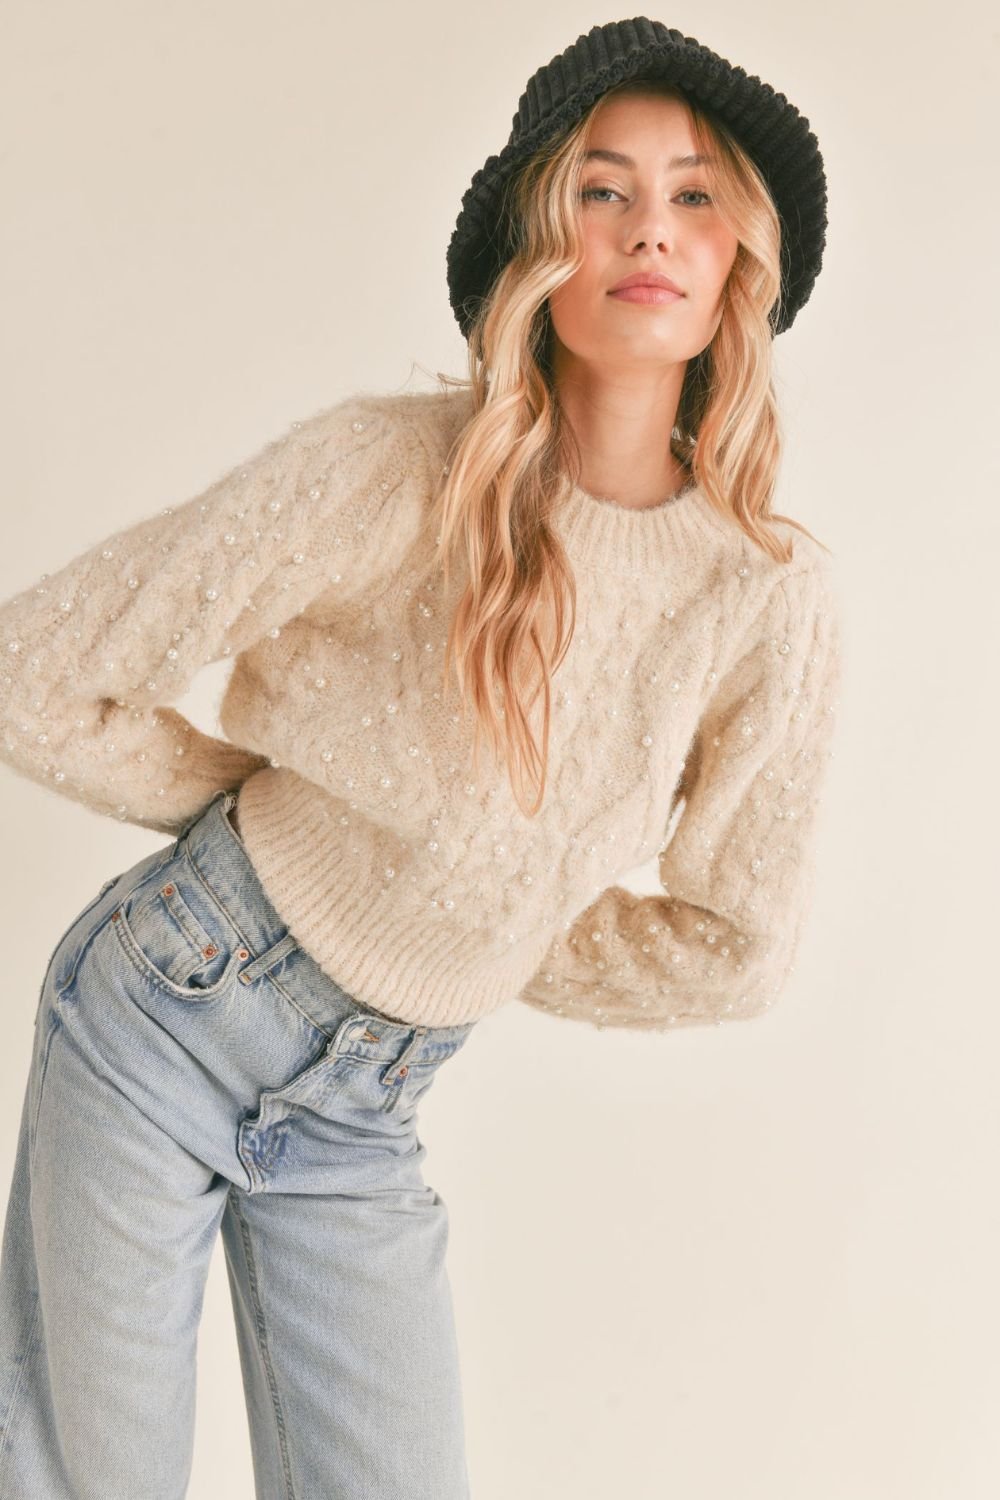 Women's Pearl Cable Knit Wool Blend Sweater | Cream - Women's Sweaters - Blooming Daily